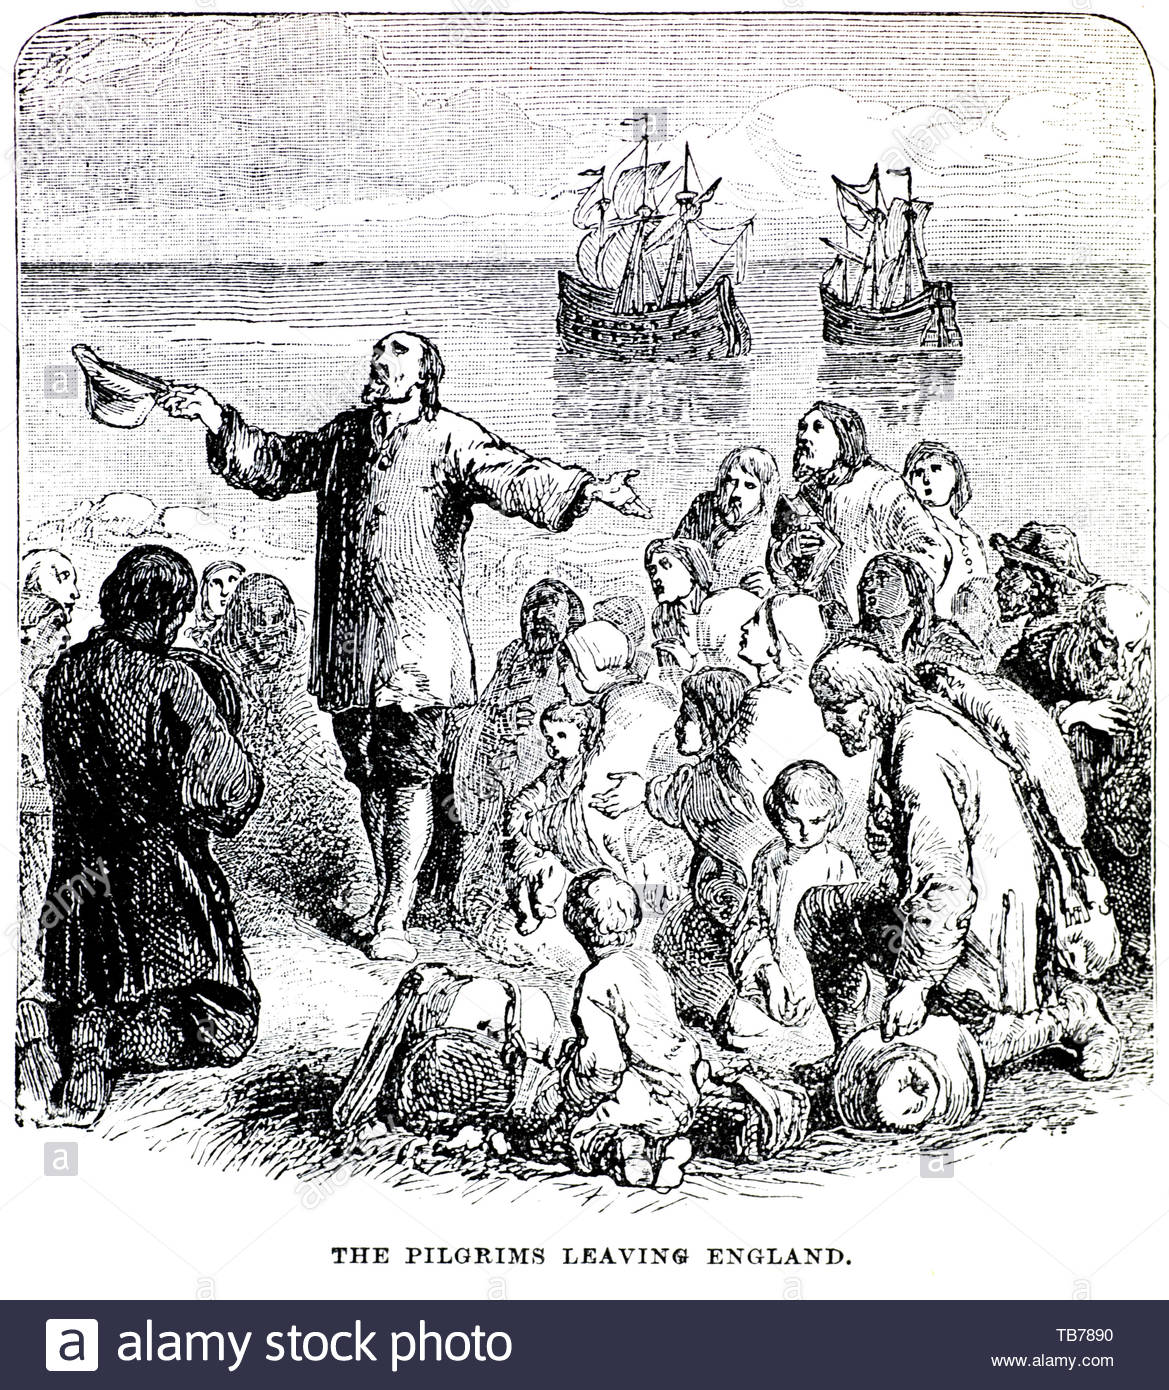 The Pilgrim Fathers preparing to depart from Southampton England on the ship Mayflower, for the Plymouth Colony in Plymouth, Massachusetts, New England, America in 1620 Stock Photo